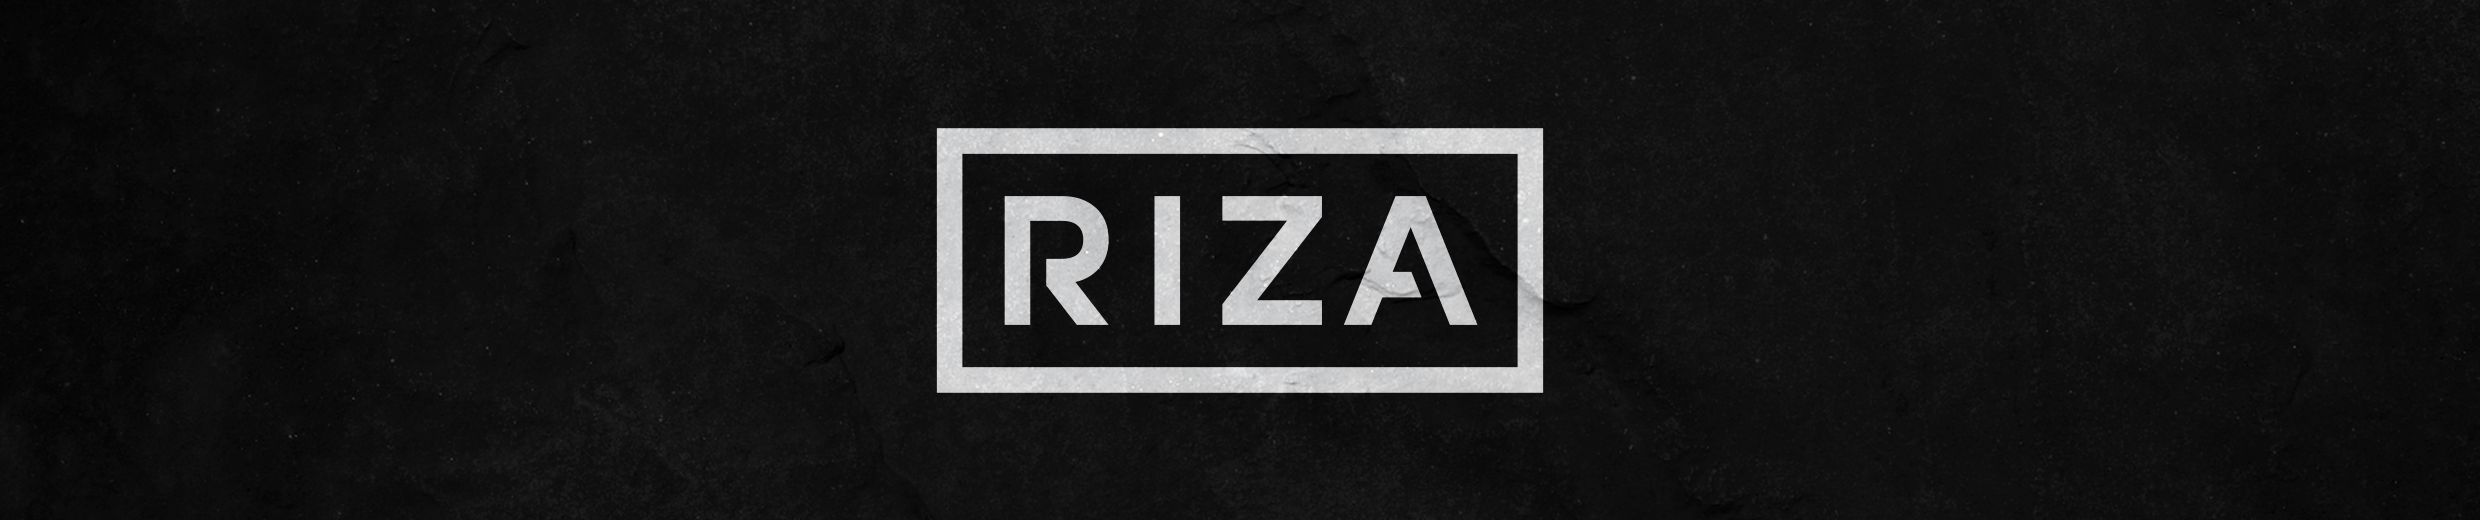 Stream Rizlan Riza music  Listen to songs, albums, playlists for free on  SoundCloud